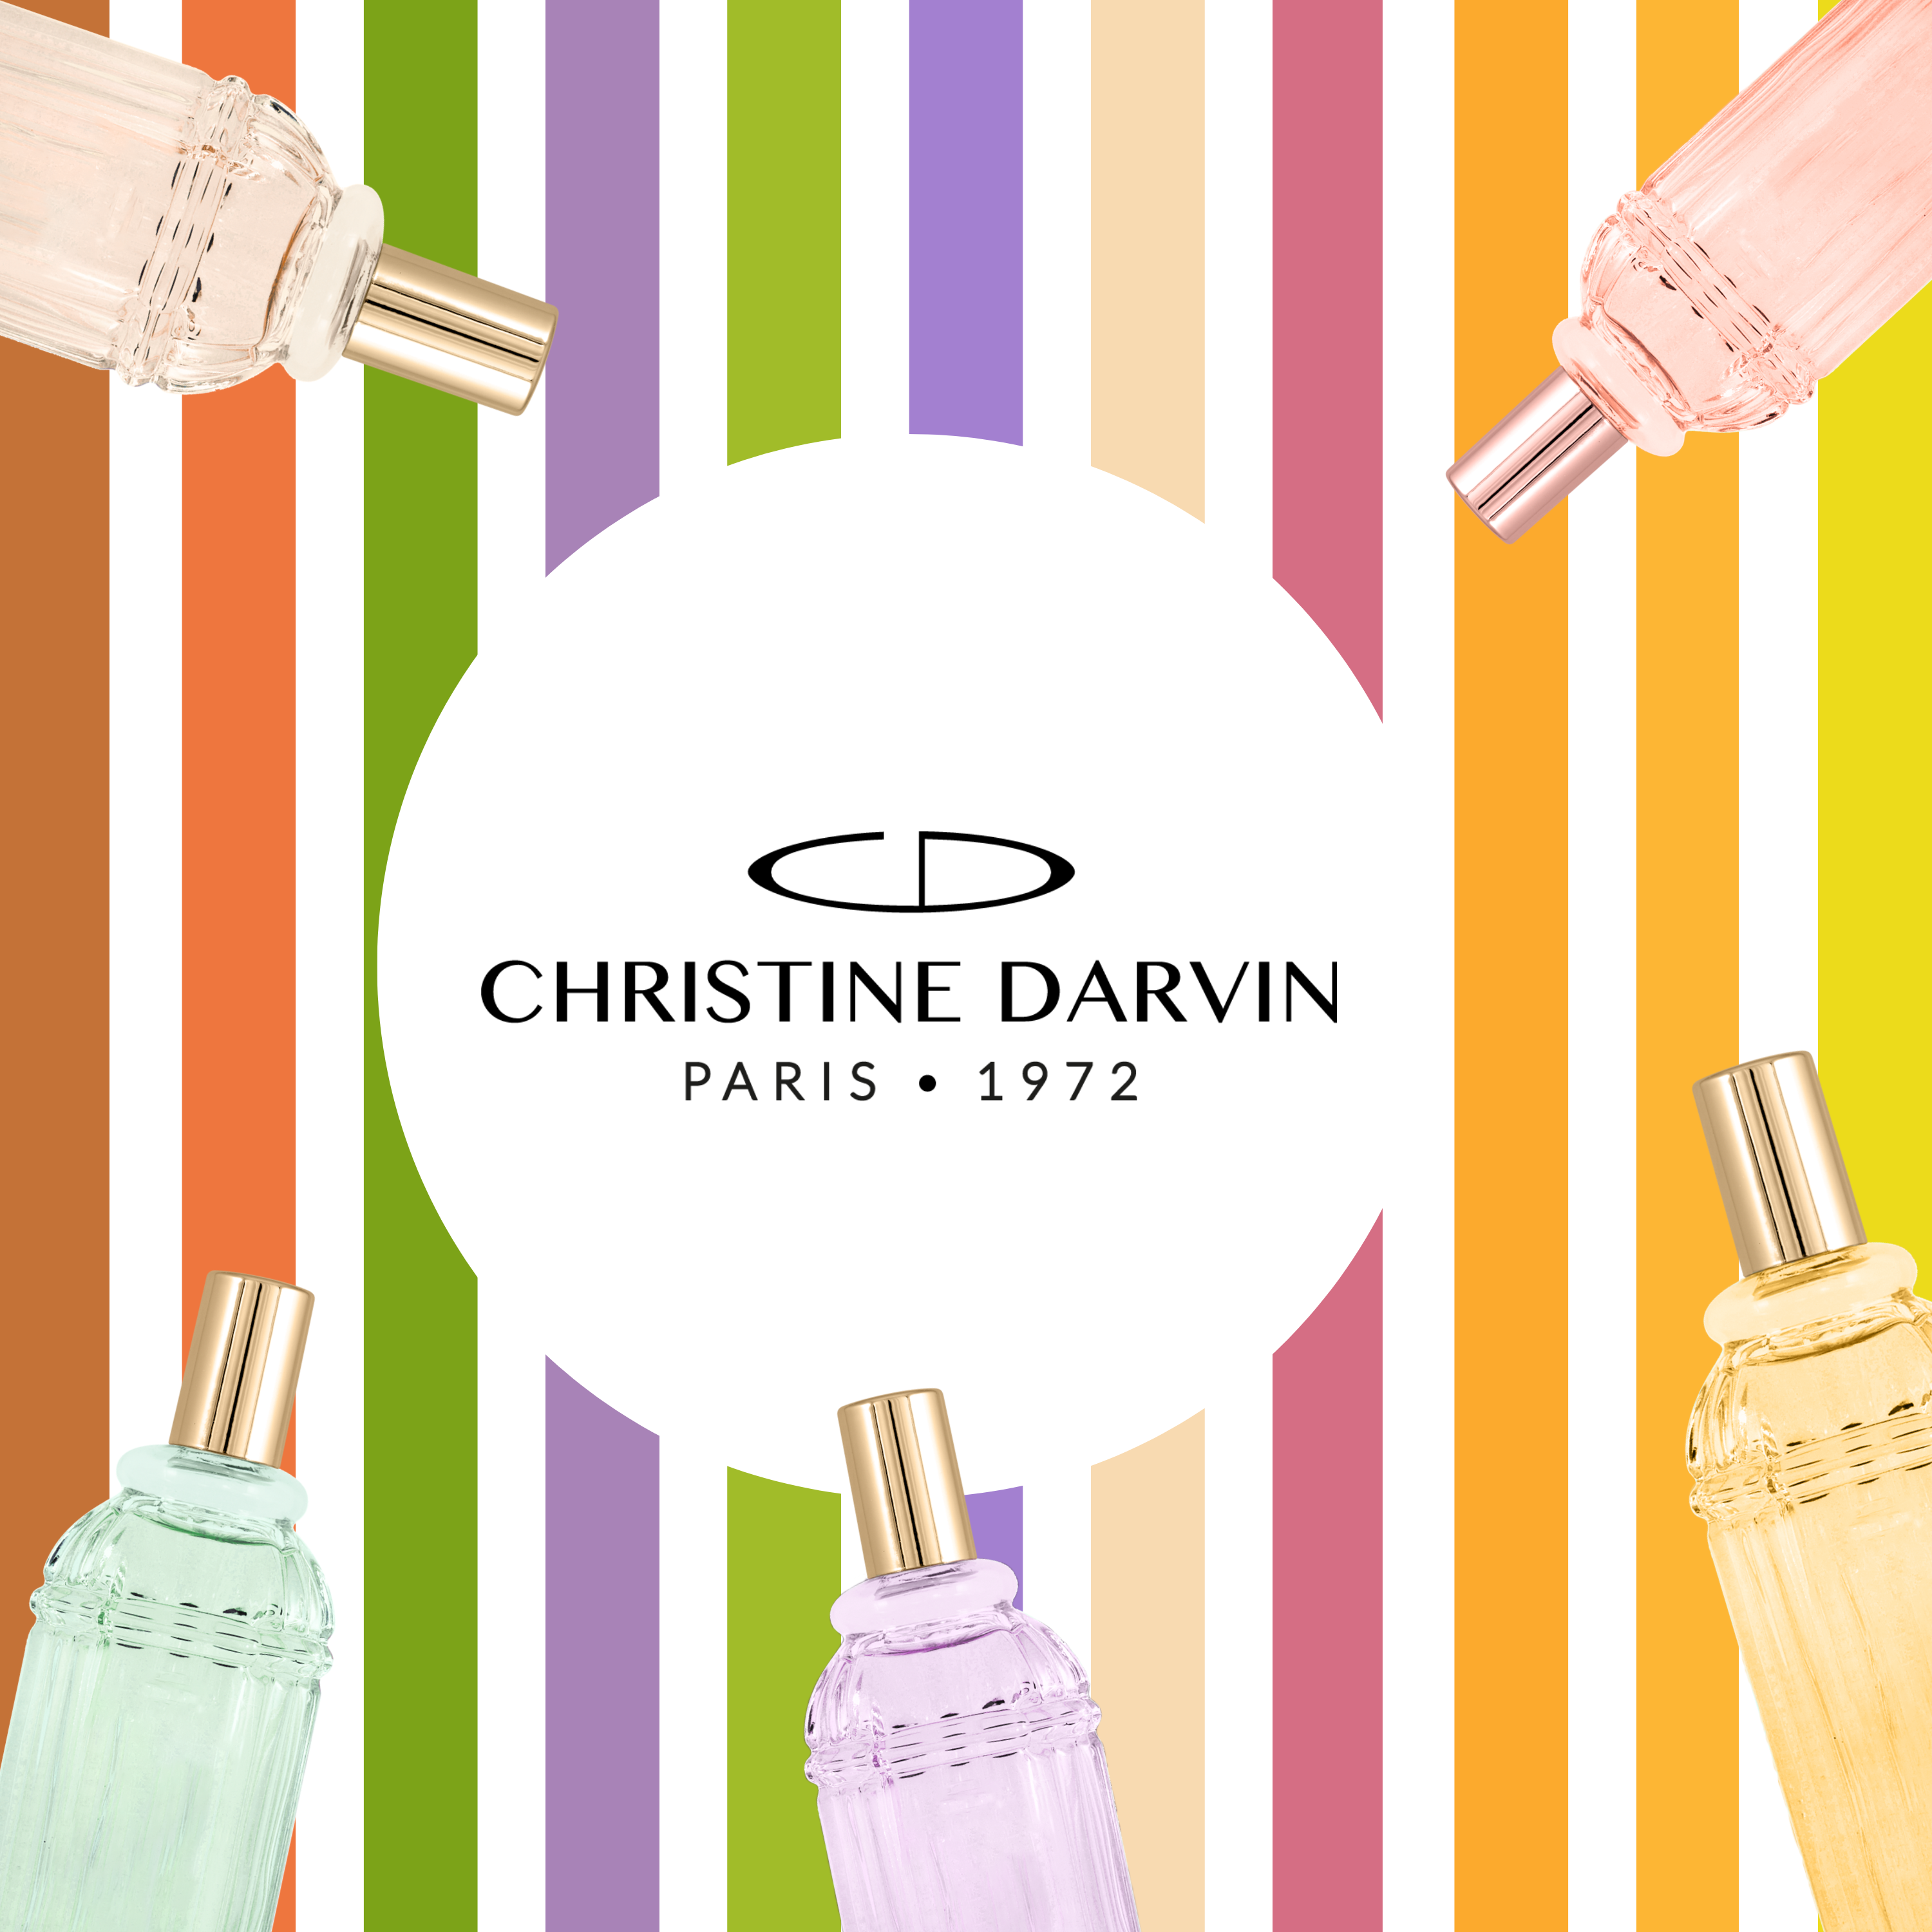 Christine Darvin, a visionary of the late 19th century, revolutionized the world of perfumery by introducing the innovative concept of democratic perfumery, aimed at making French olfactory subtleties accessible to all. His company, founded in 1960, marked a turning point in the history of perfumery by establishing a production plant dedicated to the manufacture of his fragrant creations. Thanks to a rigorous manufacturing process and Darvin's know-how, the brand has maintained a high level of quality while making its products more accessible. In 1972, the factory was acquired by the Madrid brothers, who were committed to preserving the company's unique craftsmanship while seeking to conquer the French market.